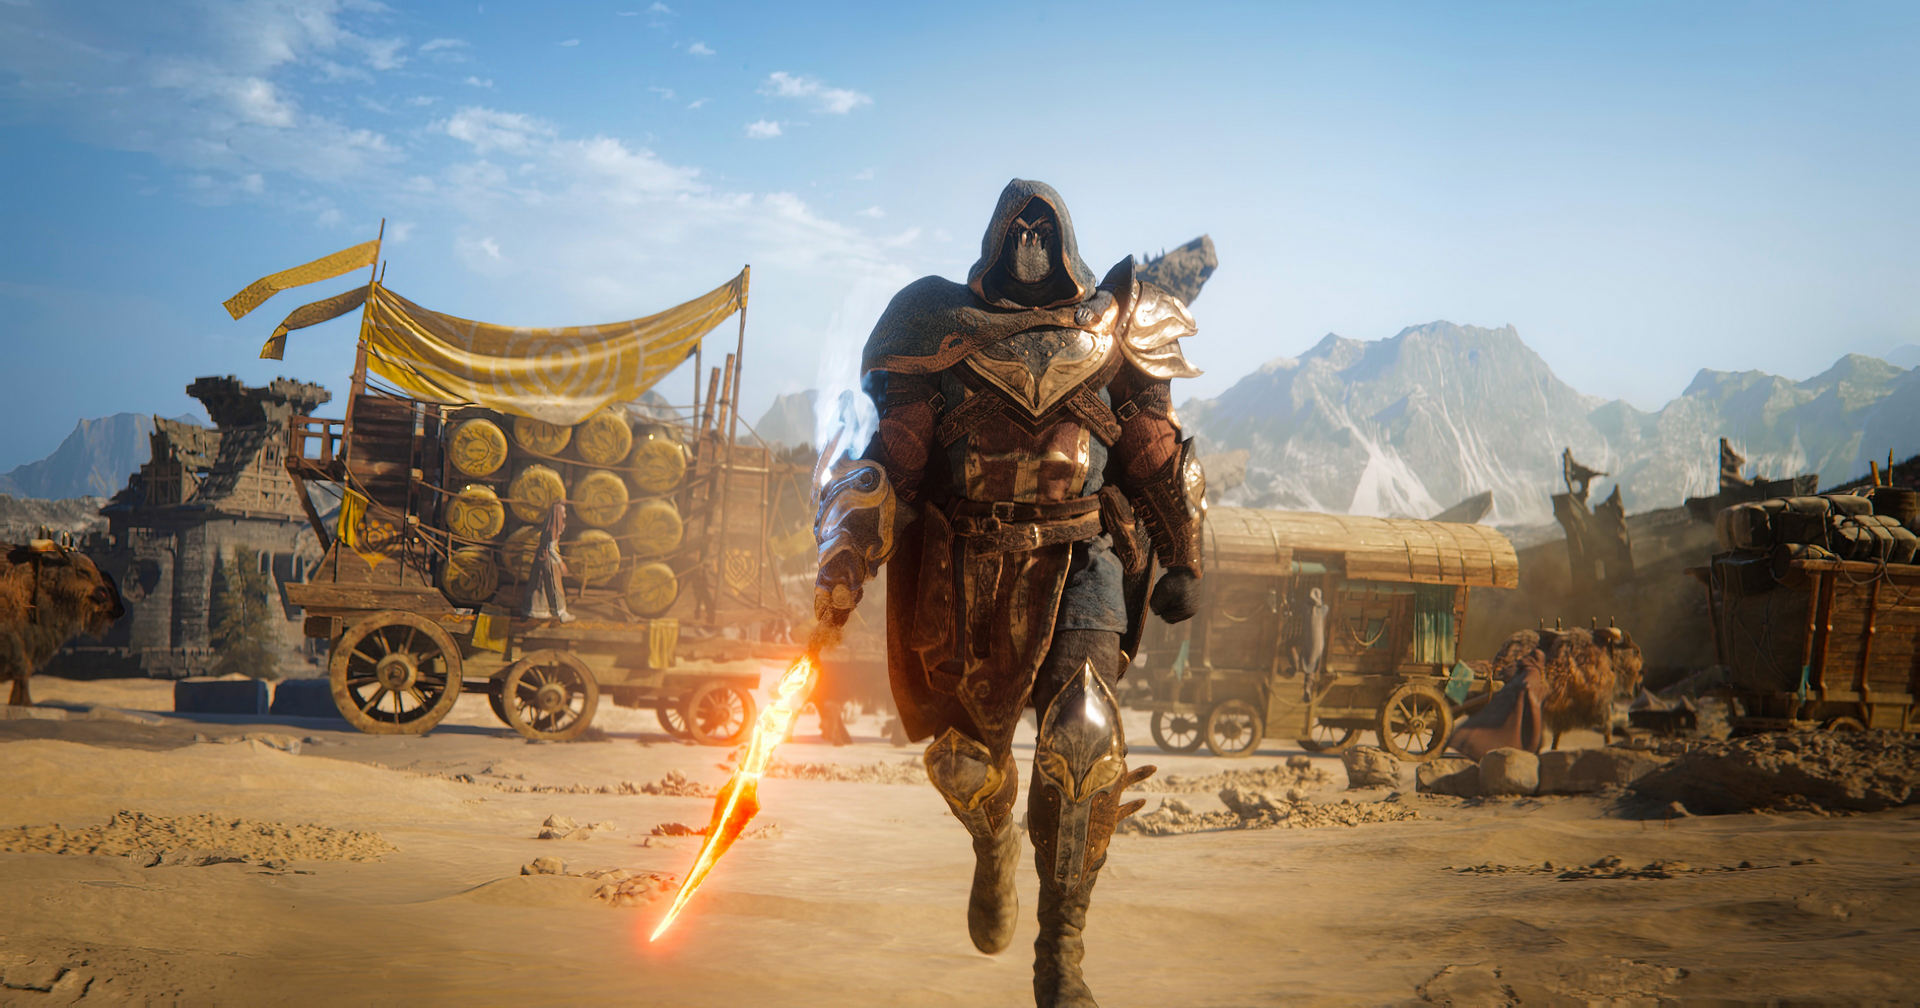 The protagonist strides towards us with a glowing sword in a desert. Atlas Fallen proves excellent gameplay in the trailer.